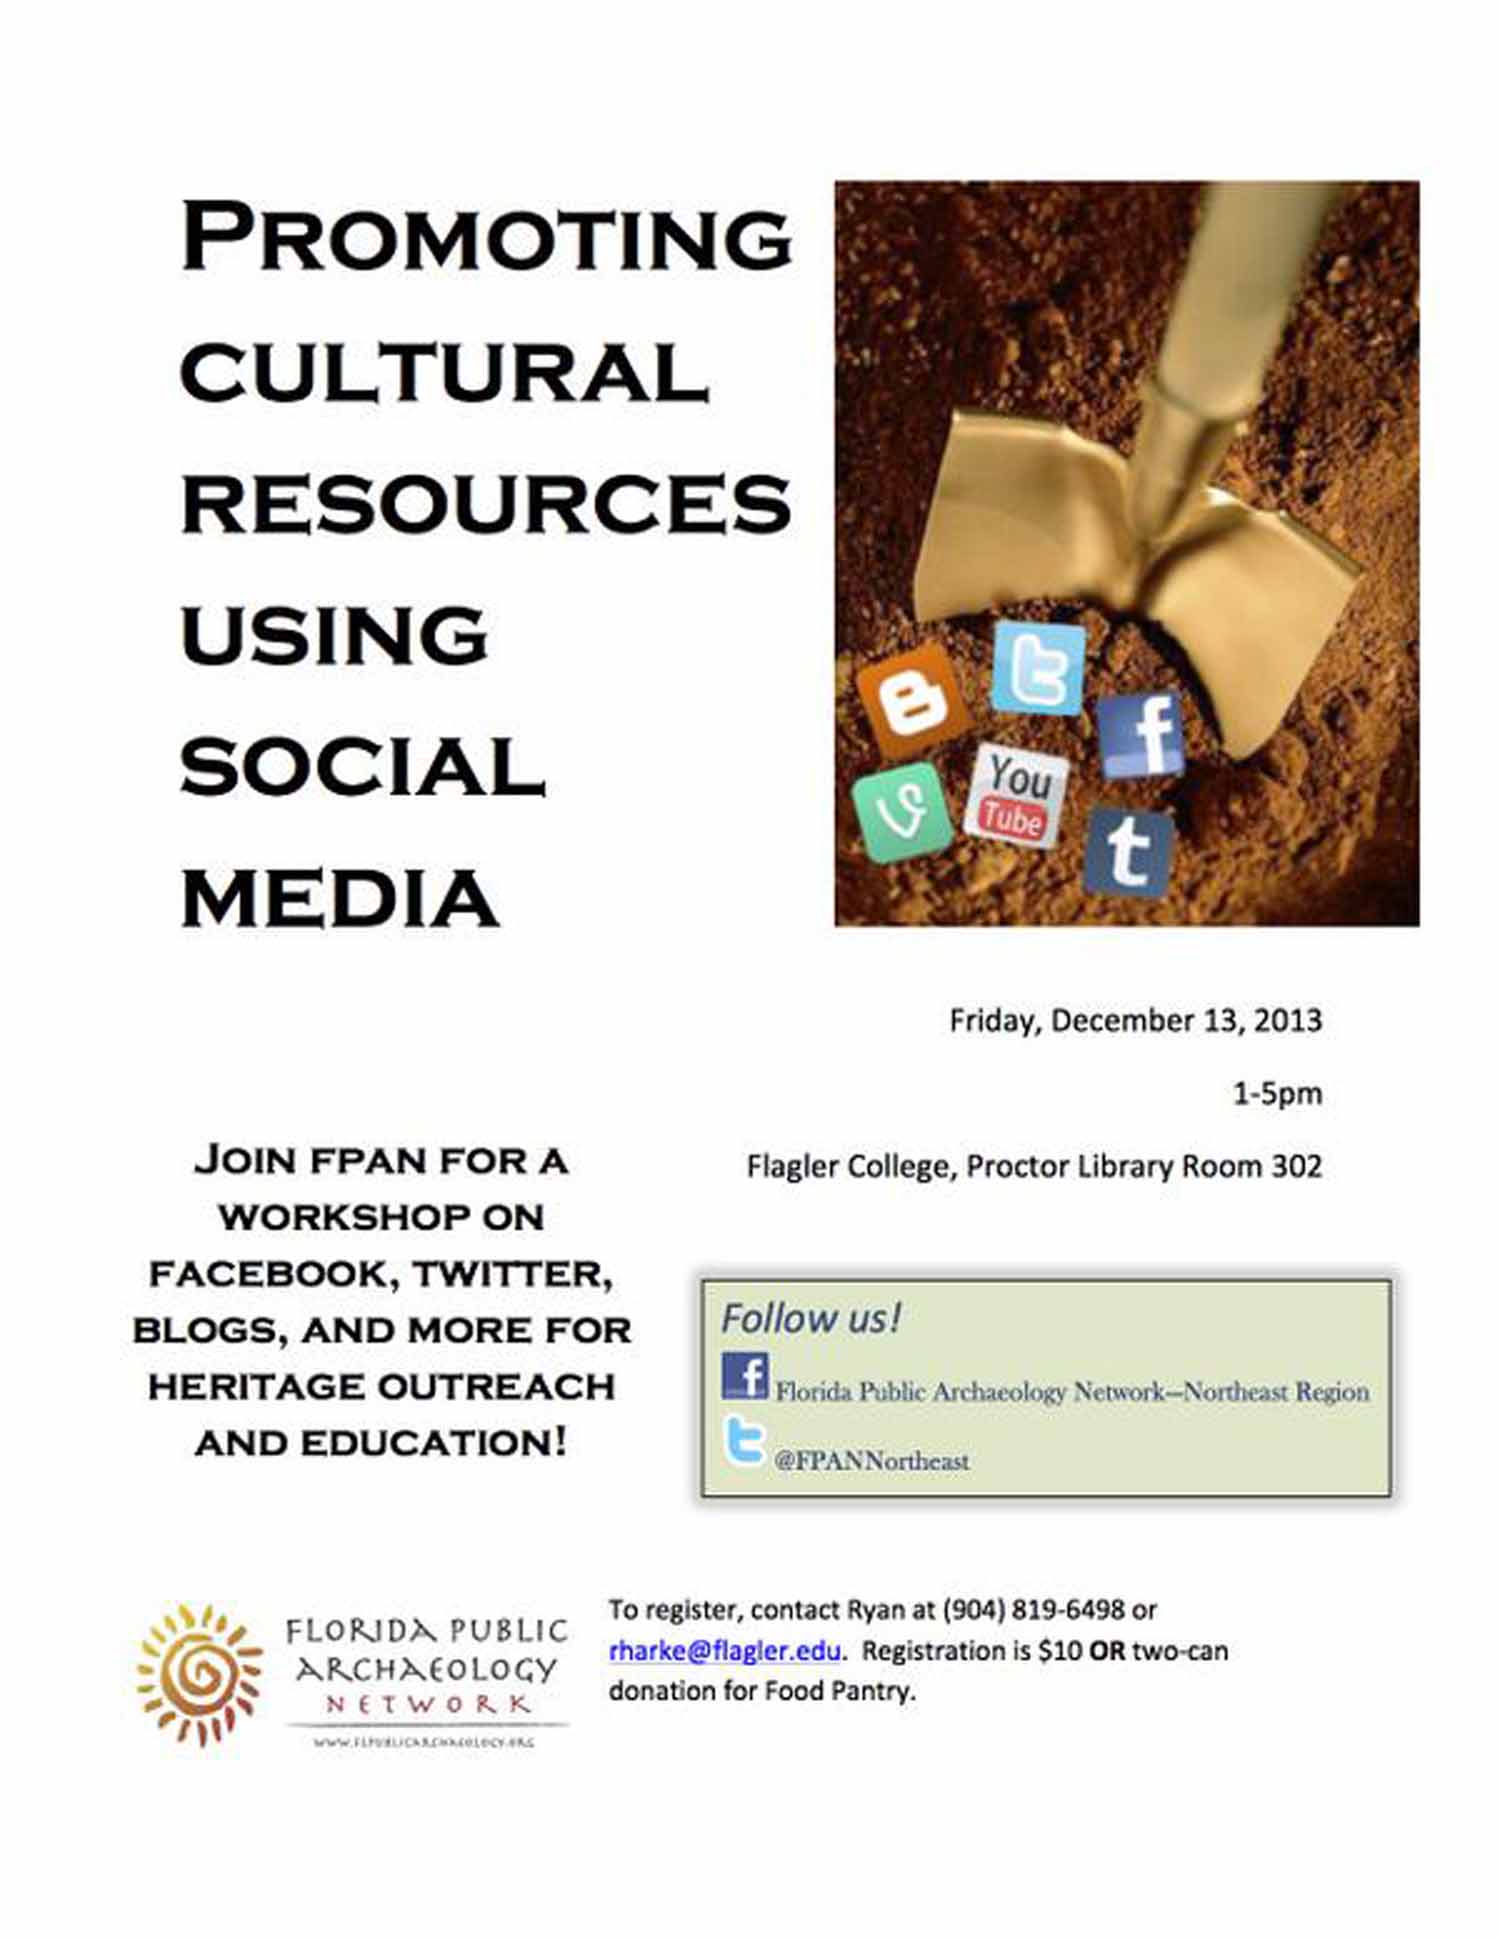 Twitter as a Cultural Resource Outreach Tool | Archaeology, Museums & Outreach